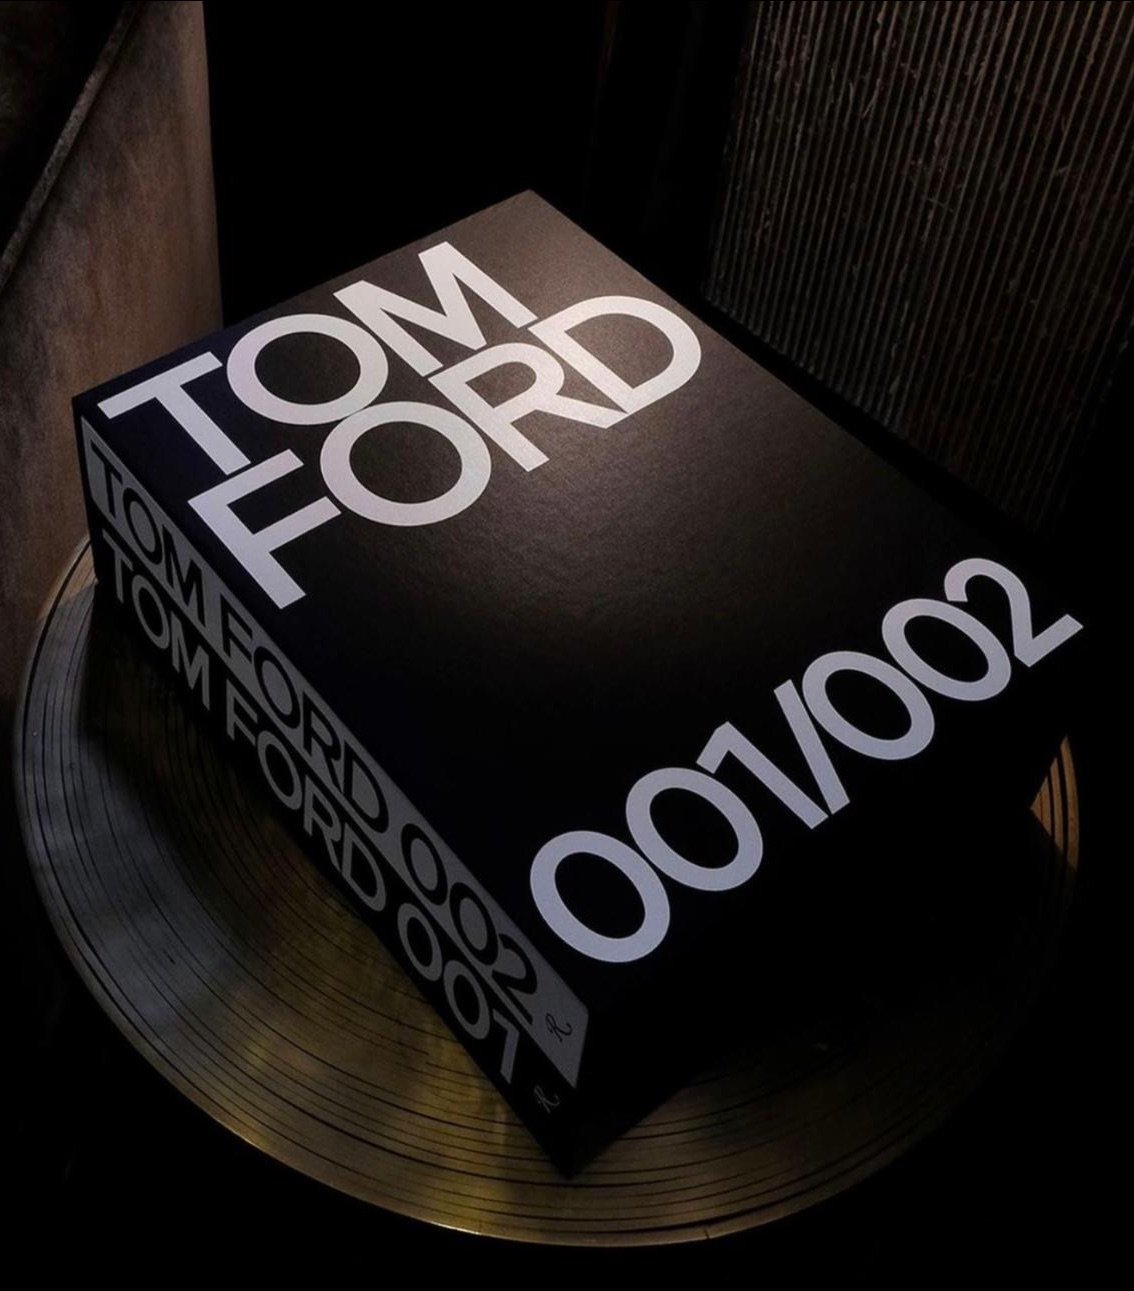 Tom Ford 001/002 Deluxe Set